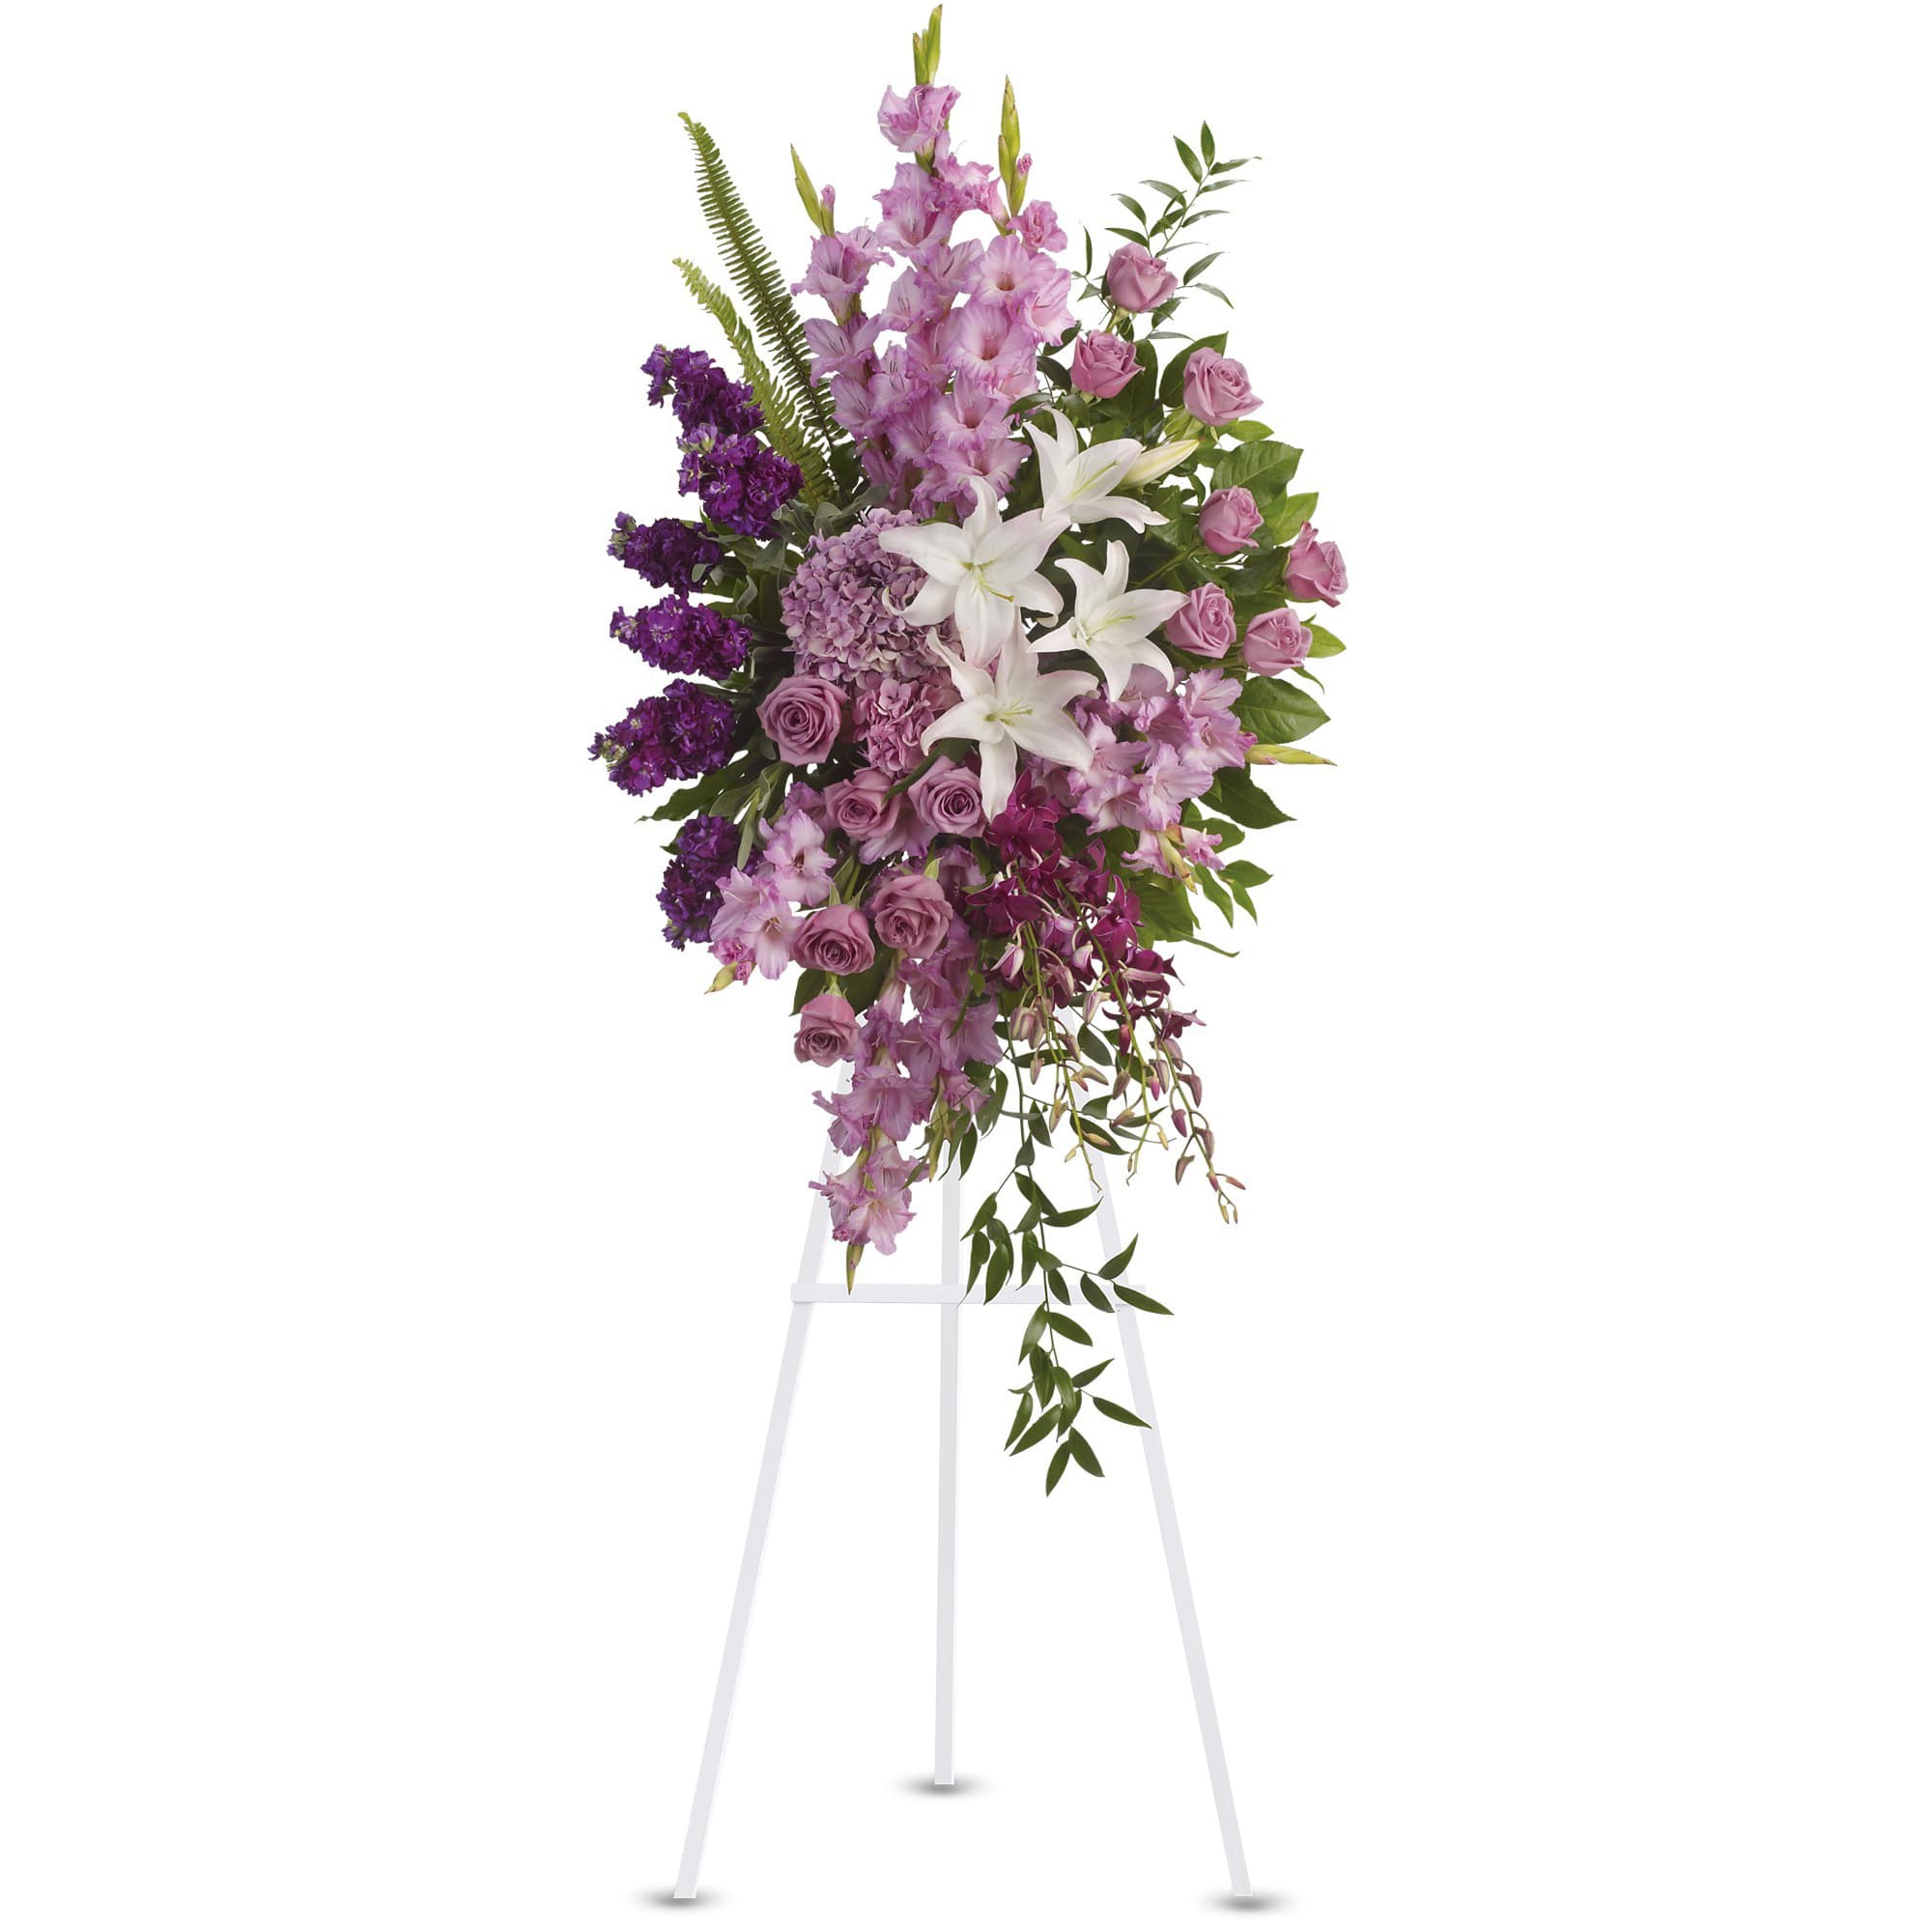 Sacred Garden Spray by Teleflora - A lovely lavender spray of flowers lets you share your compassion, hope and beauty with all. Beautifully simple. Beautifully serene. It's the perfect way to send your sincere sympathy.  